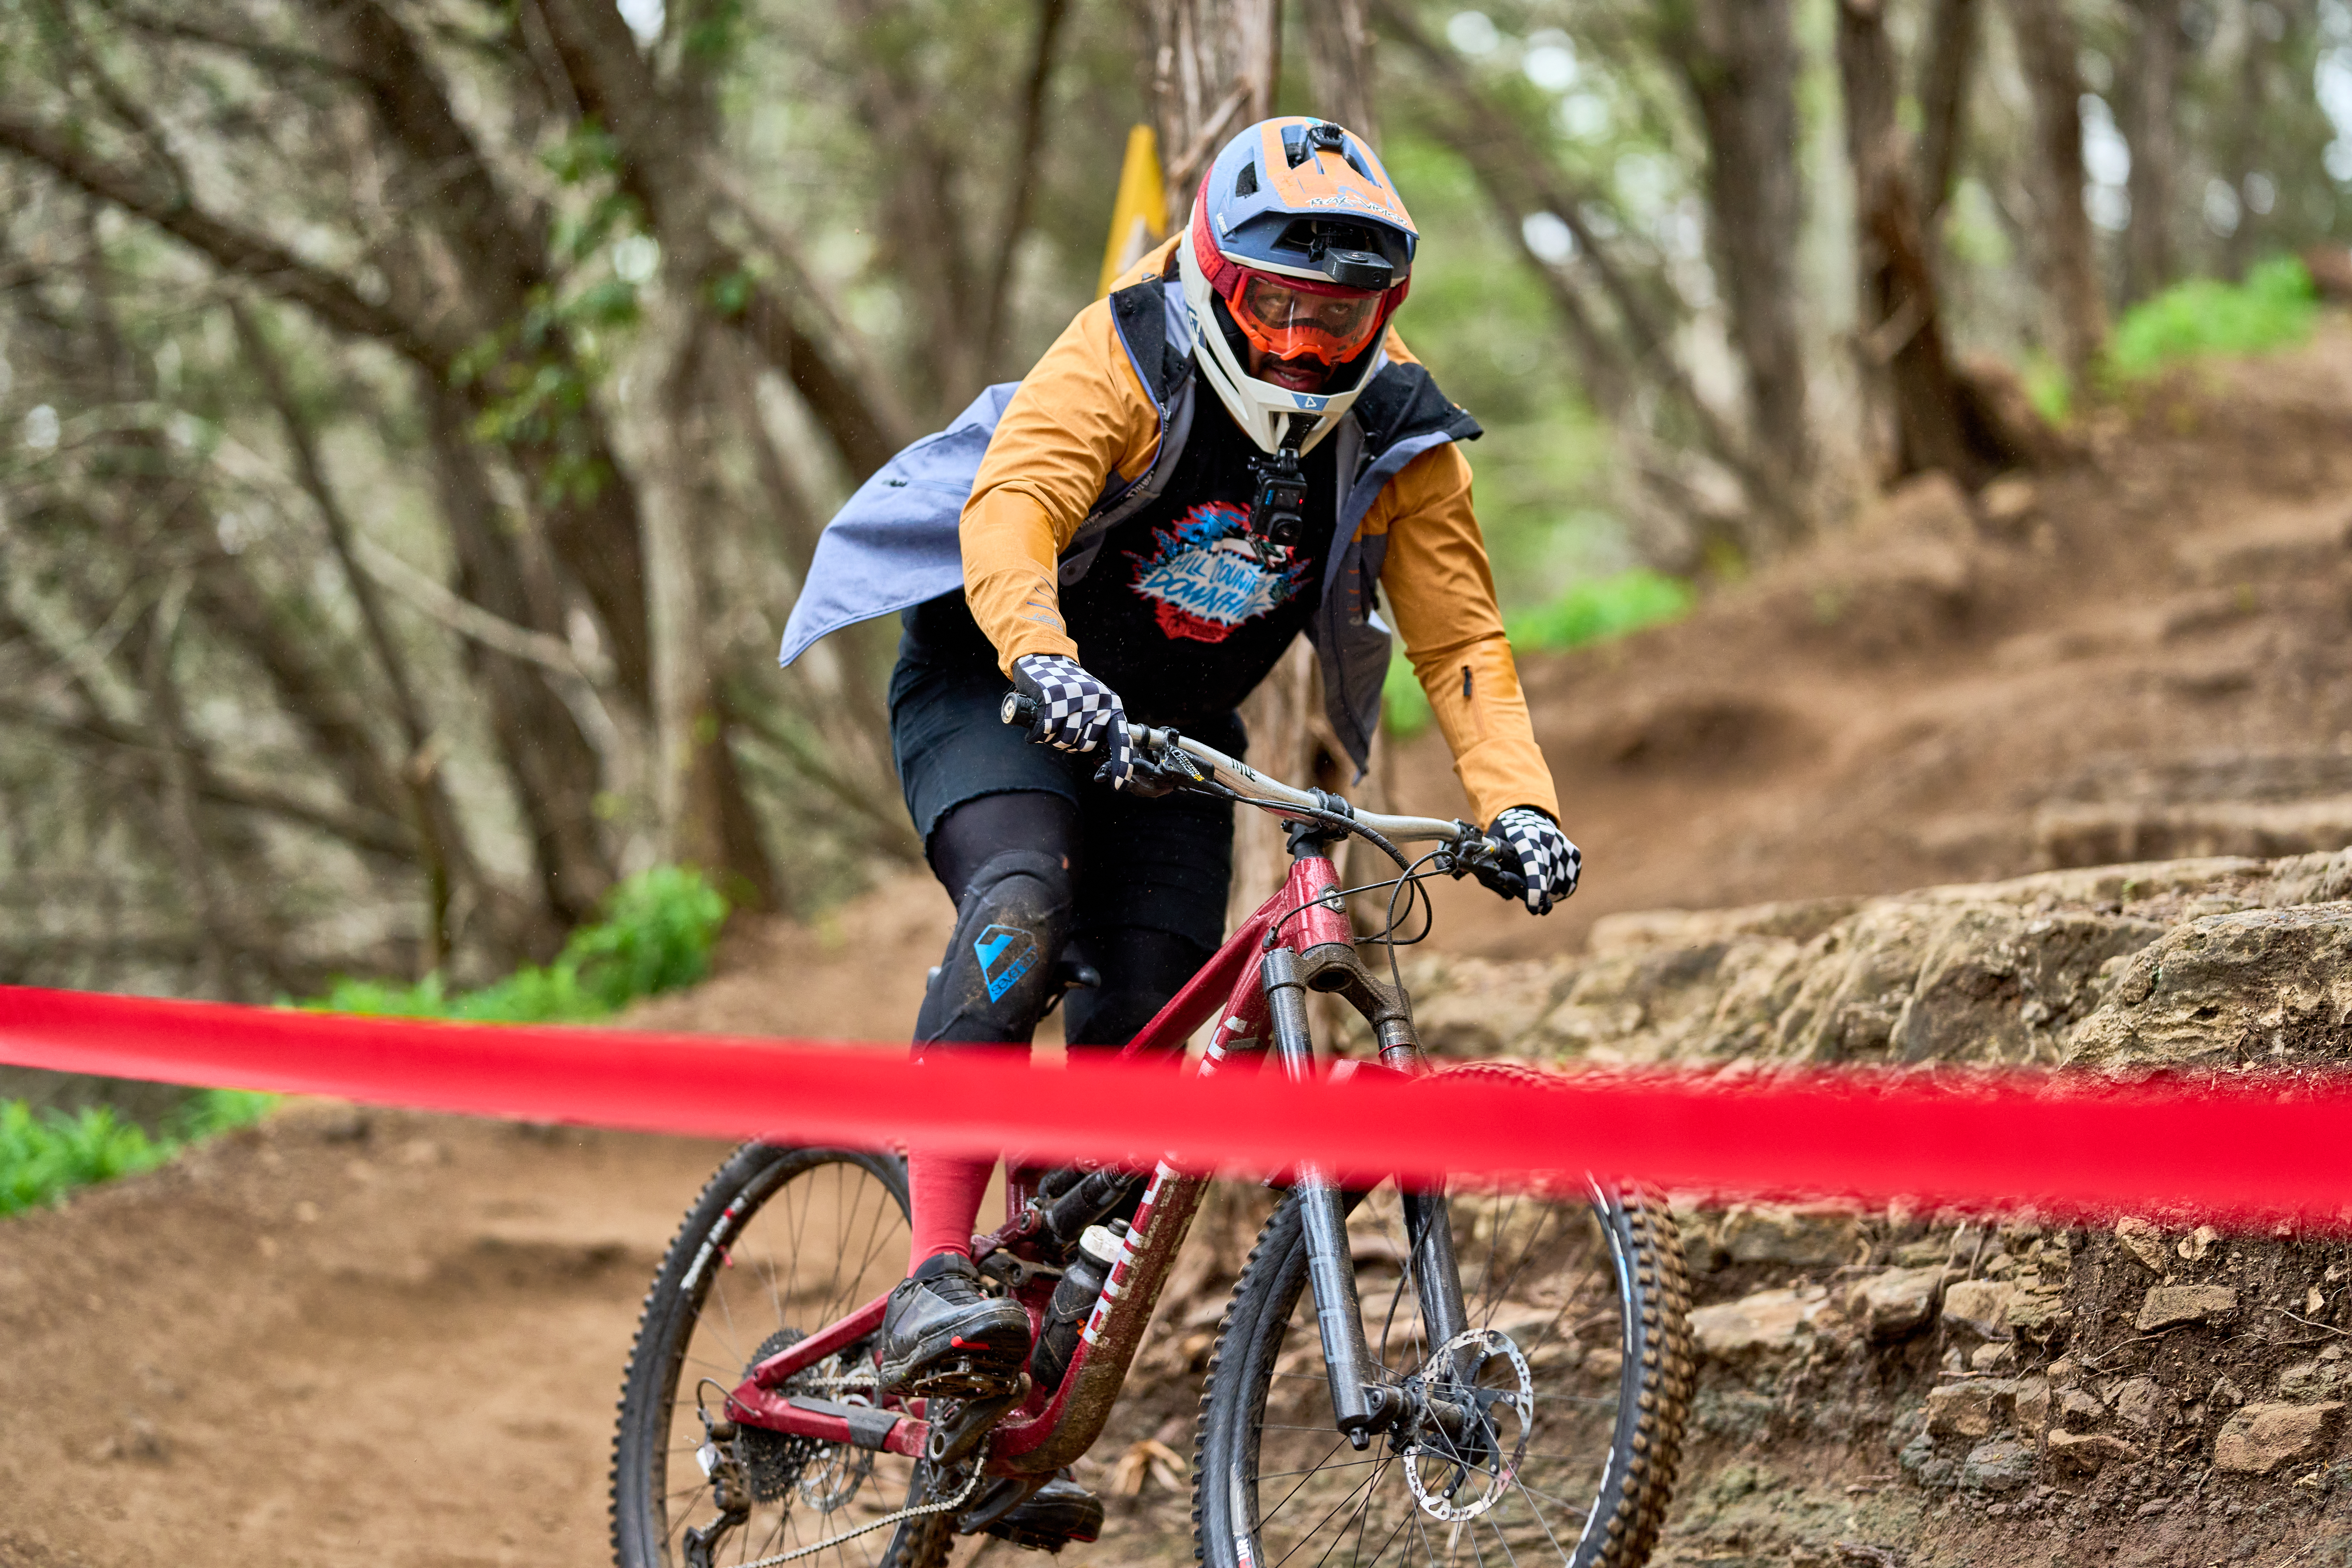 Hill Country Downhill winter series by Keith Smathers